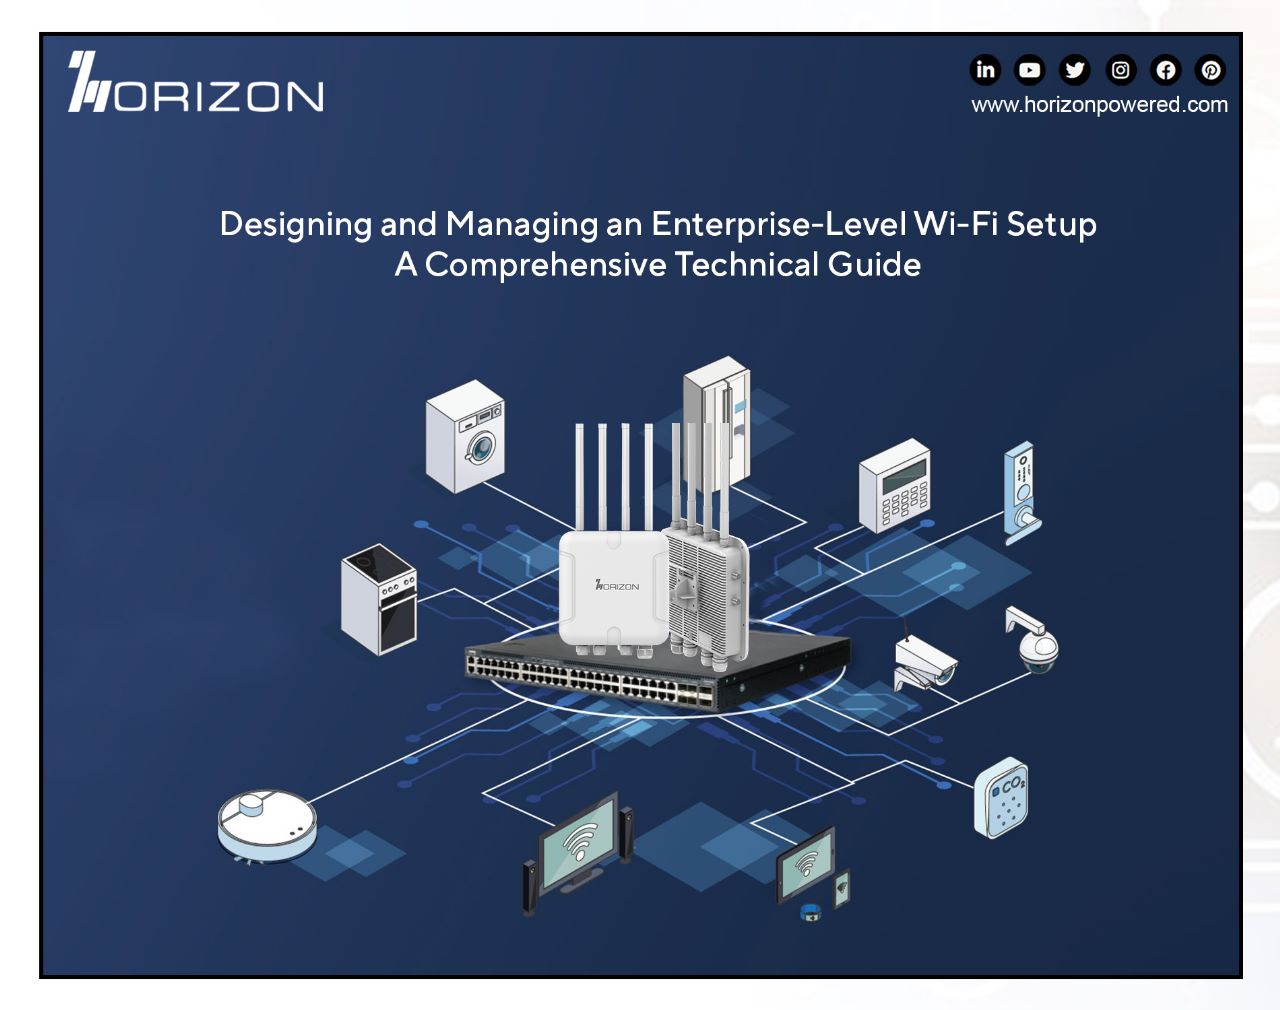 Designing and Managing an Enterprise Wi-Fi Setup: A Comprehensive Technical Guide By HorizonPowered.com Featured Images